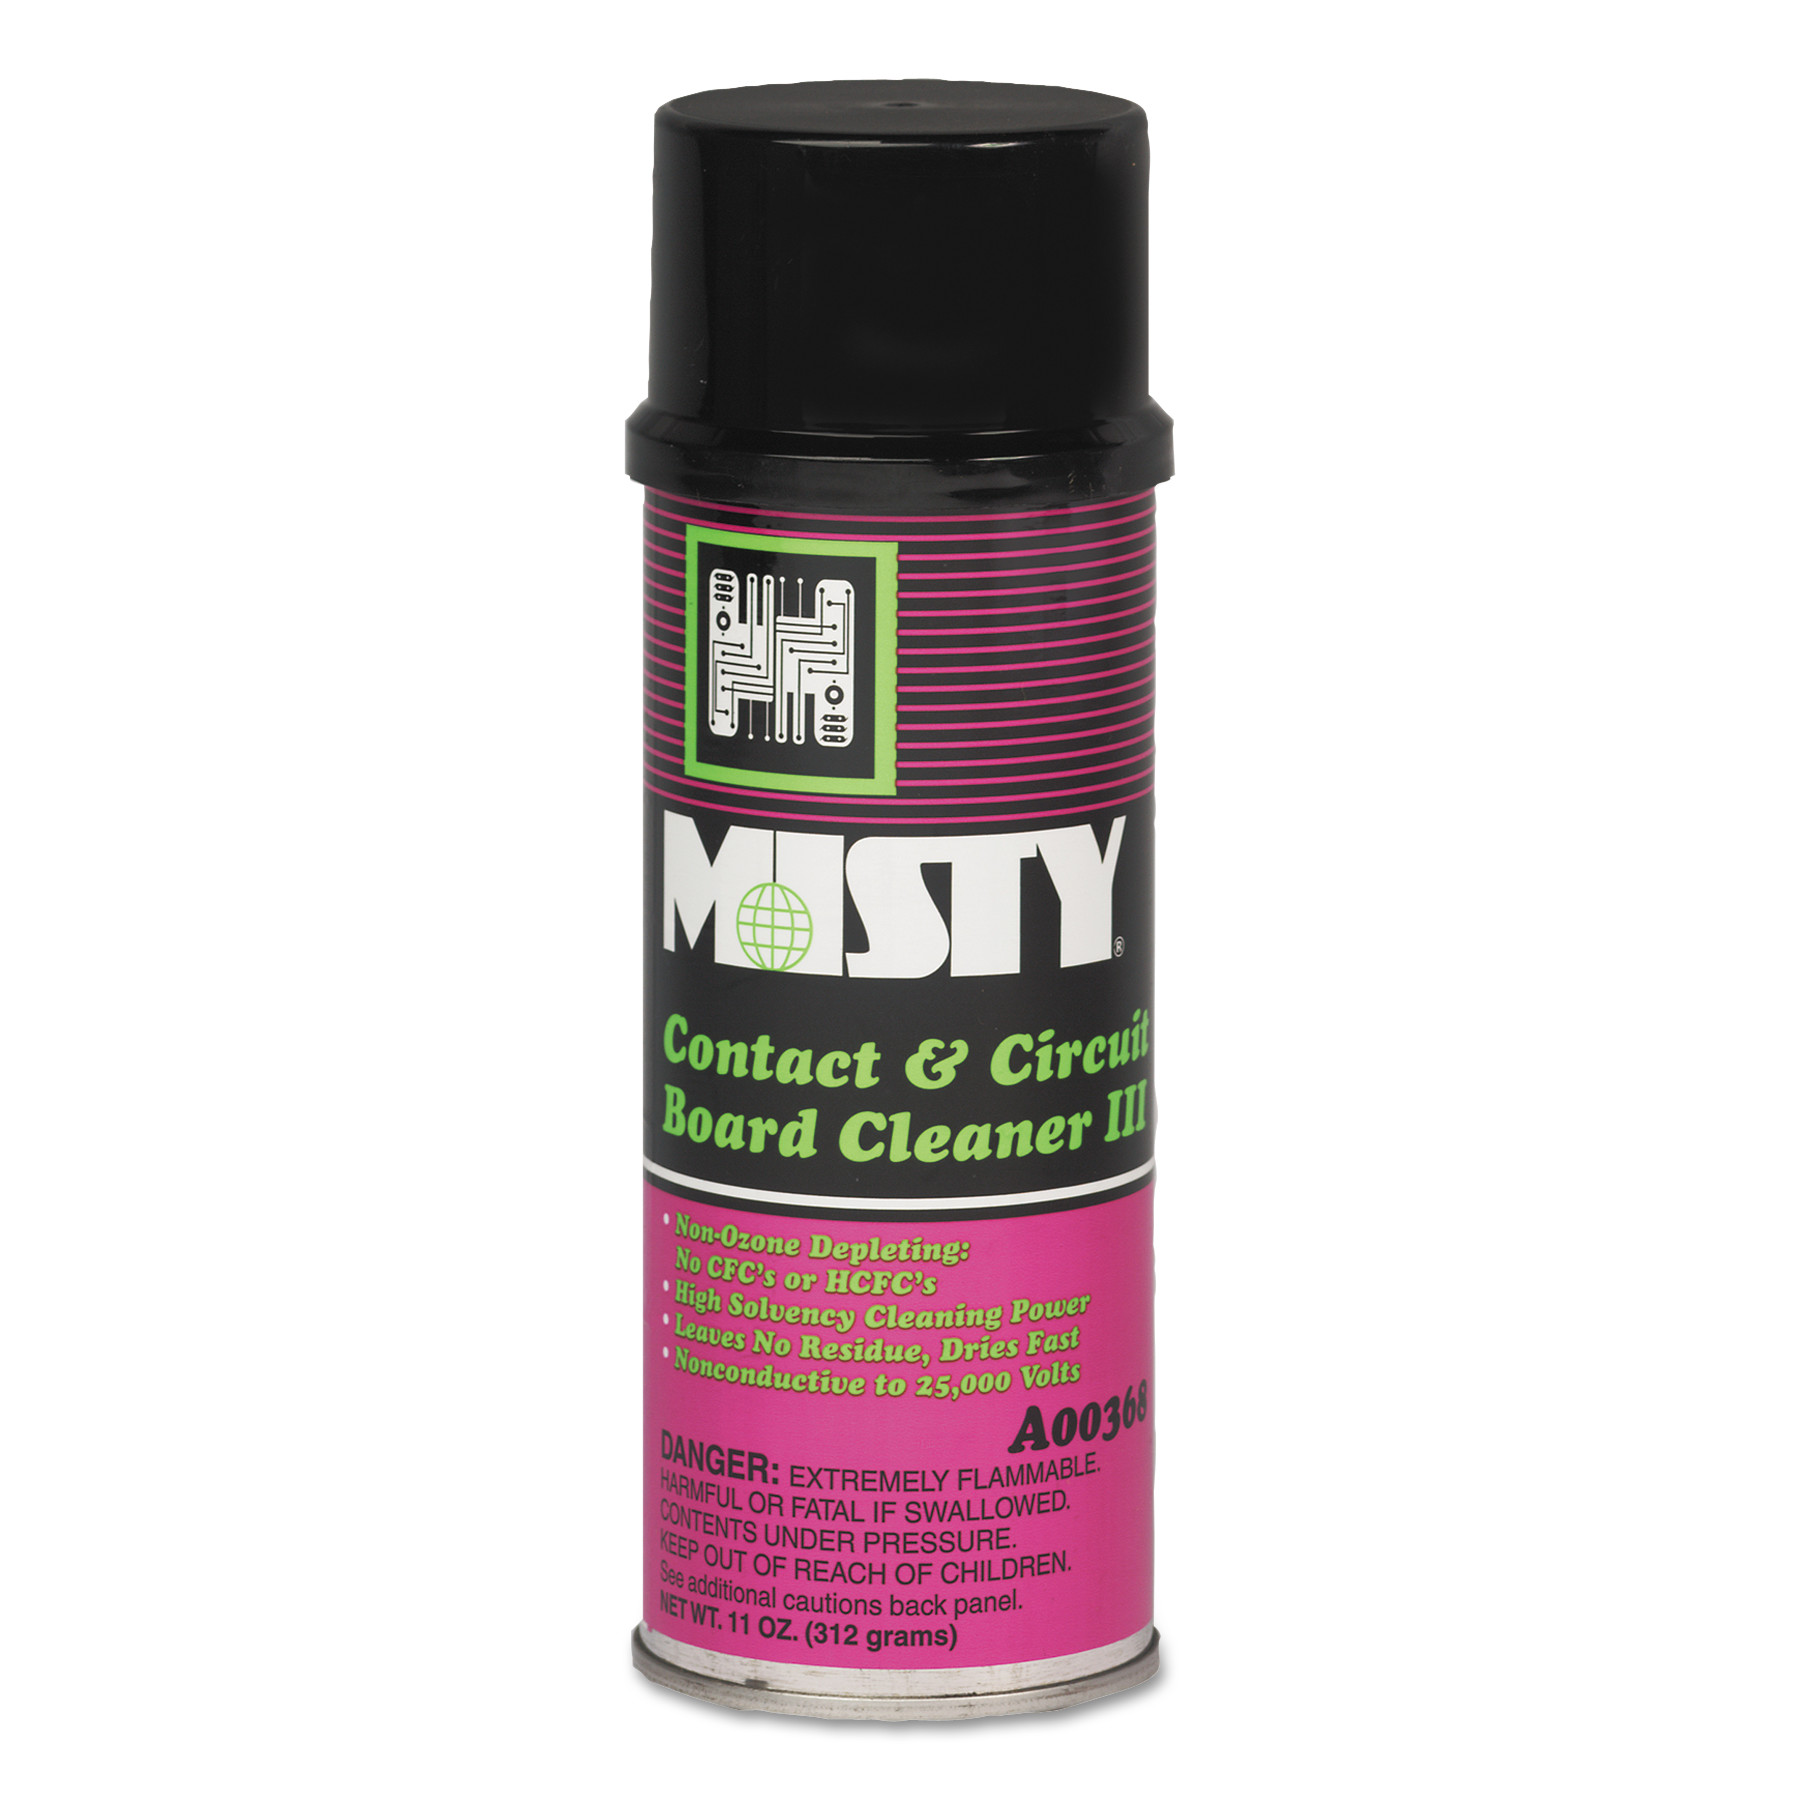  Misty 1002285 Contact and Circuit Board Cleaner III, 16 oz Aerosol Can, 12/Carton (AMR1002285) 